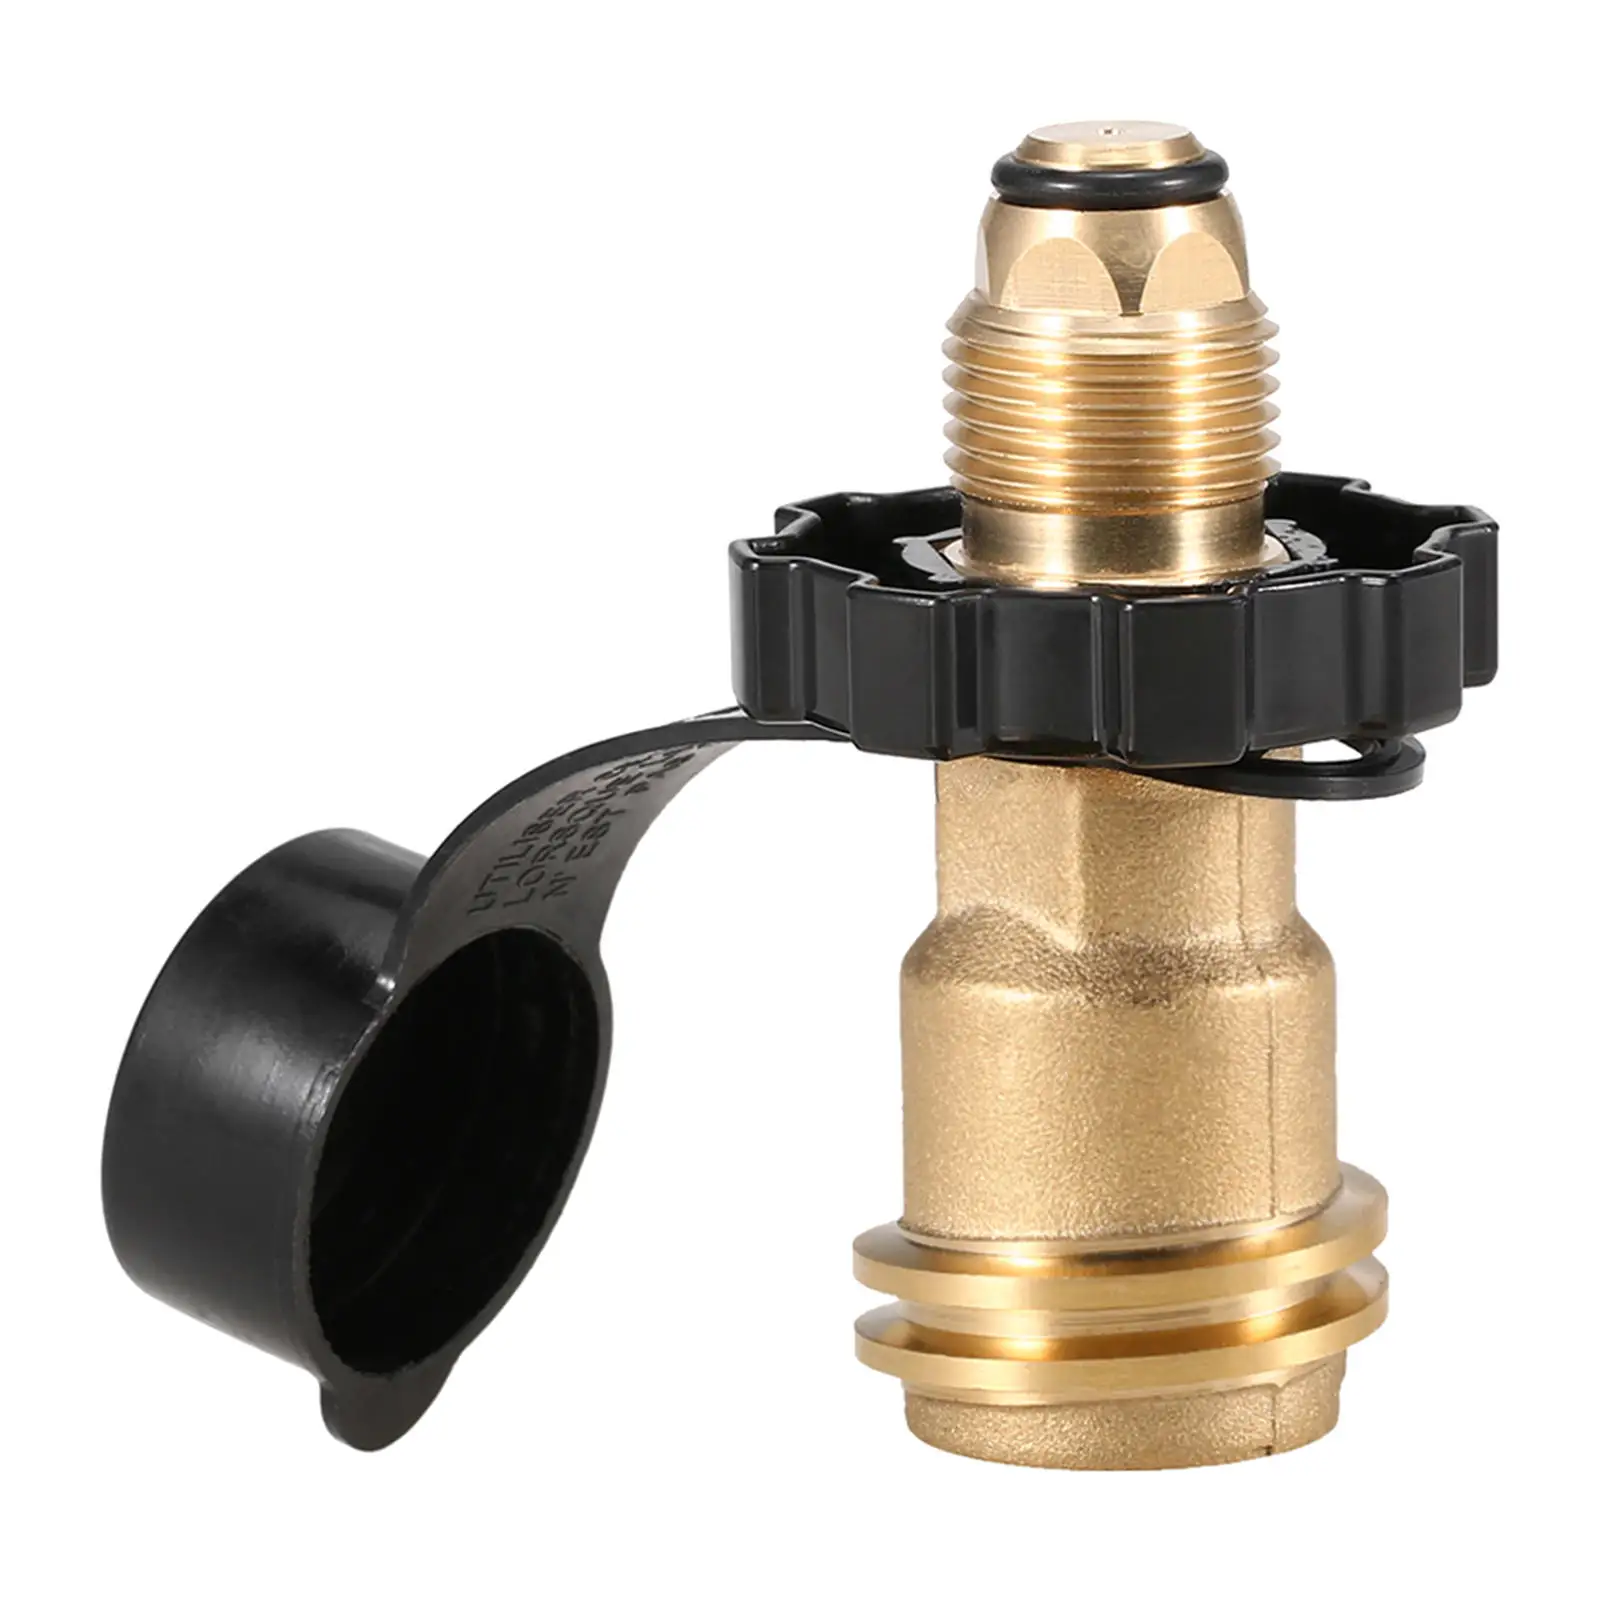 Brass Propane Tank Cylinder Adapter Convert POL to QCC1/ Type 1 Grill BBQ 50LB Pressure Regulator Connection